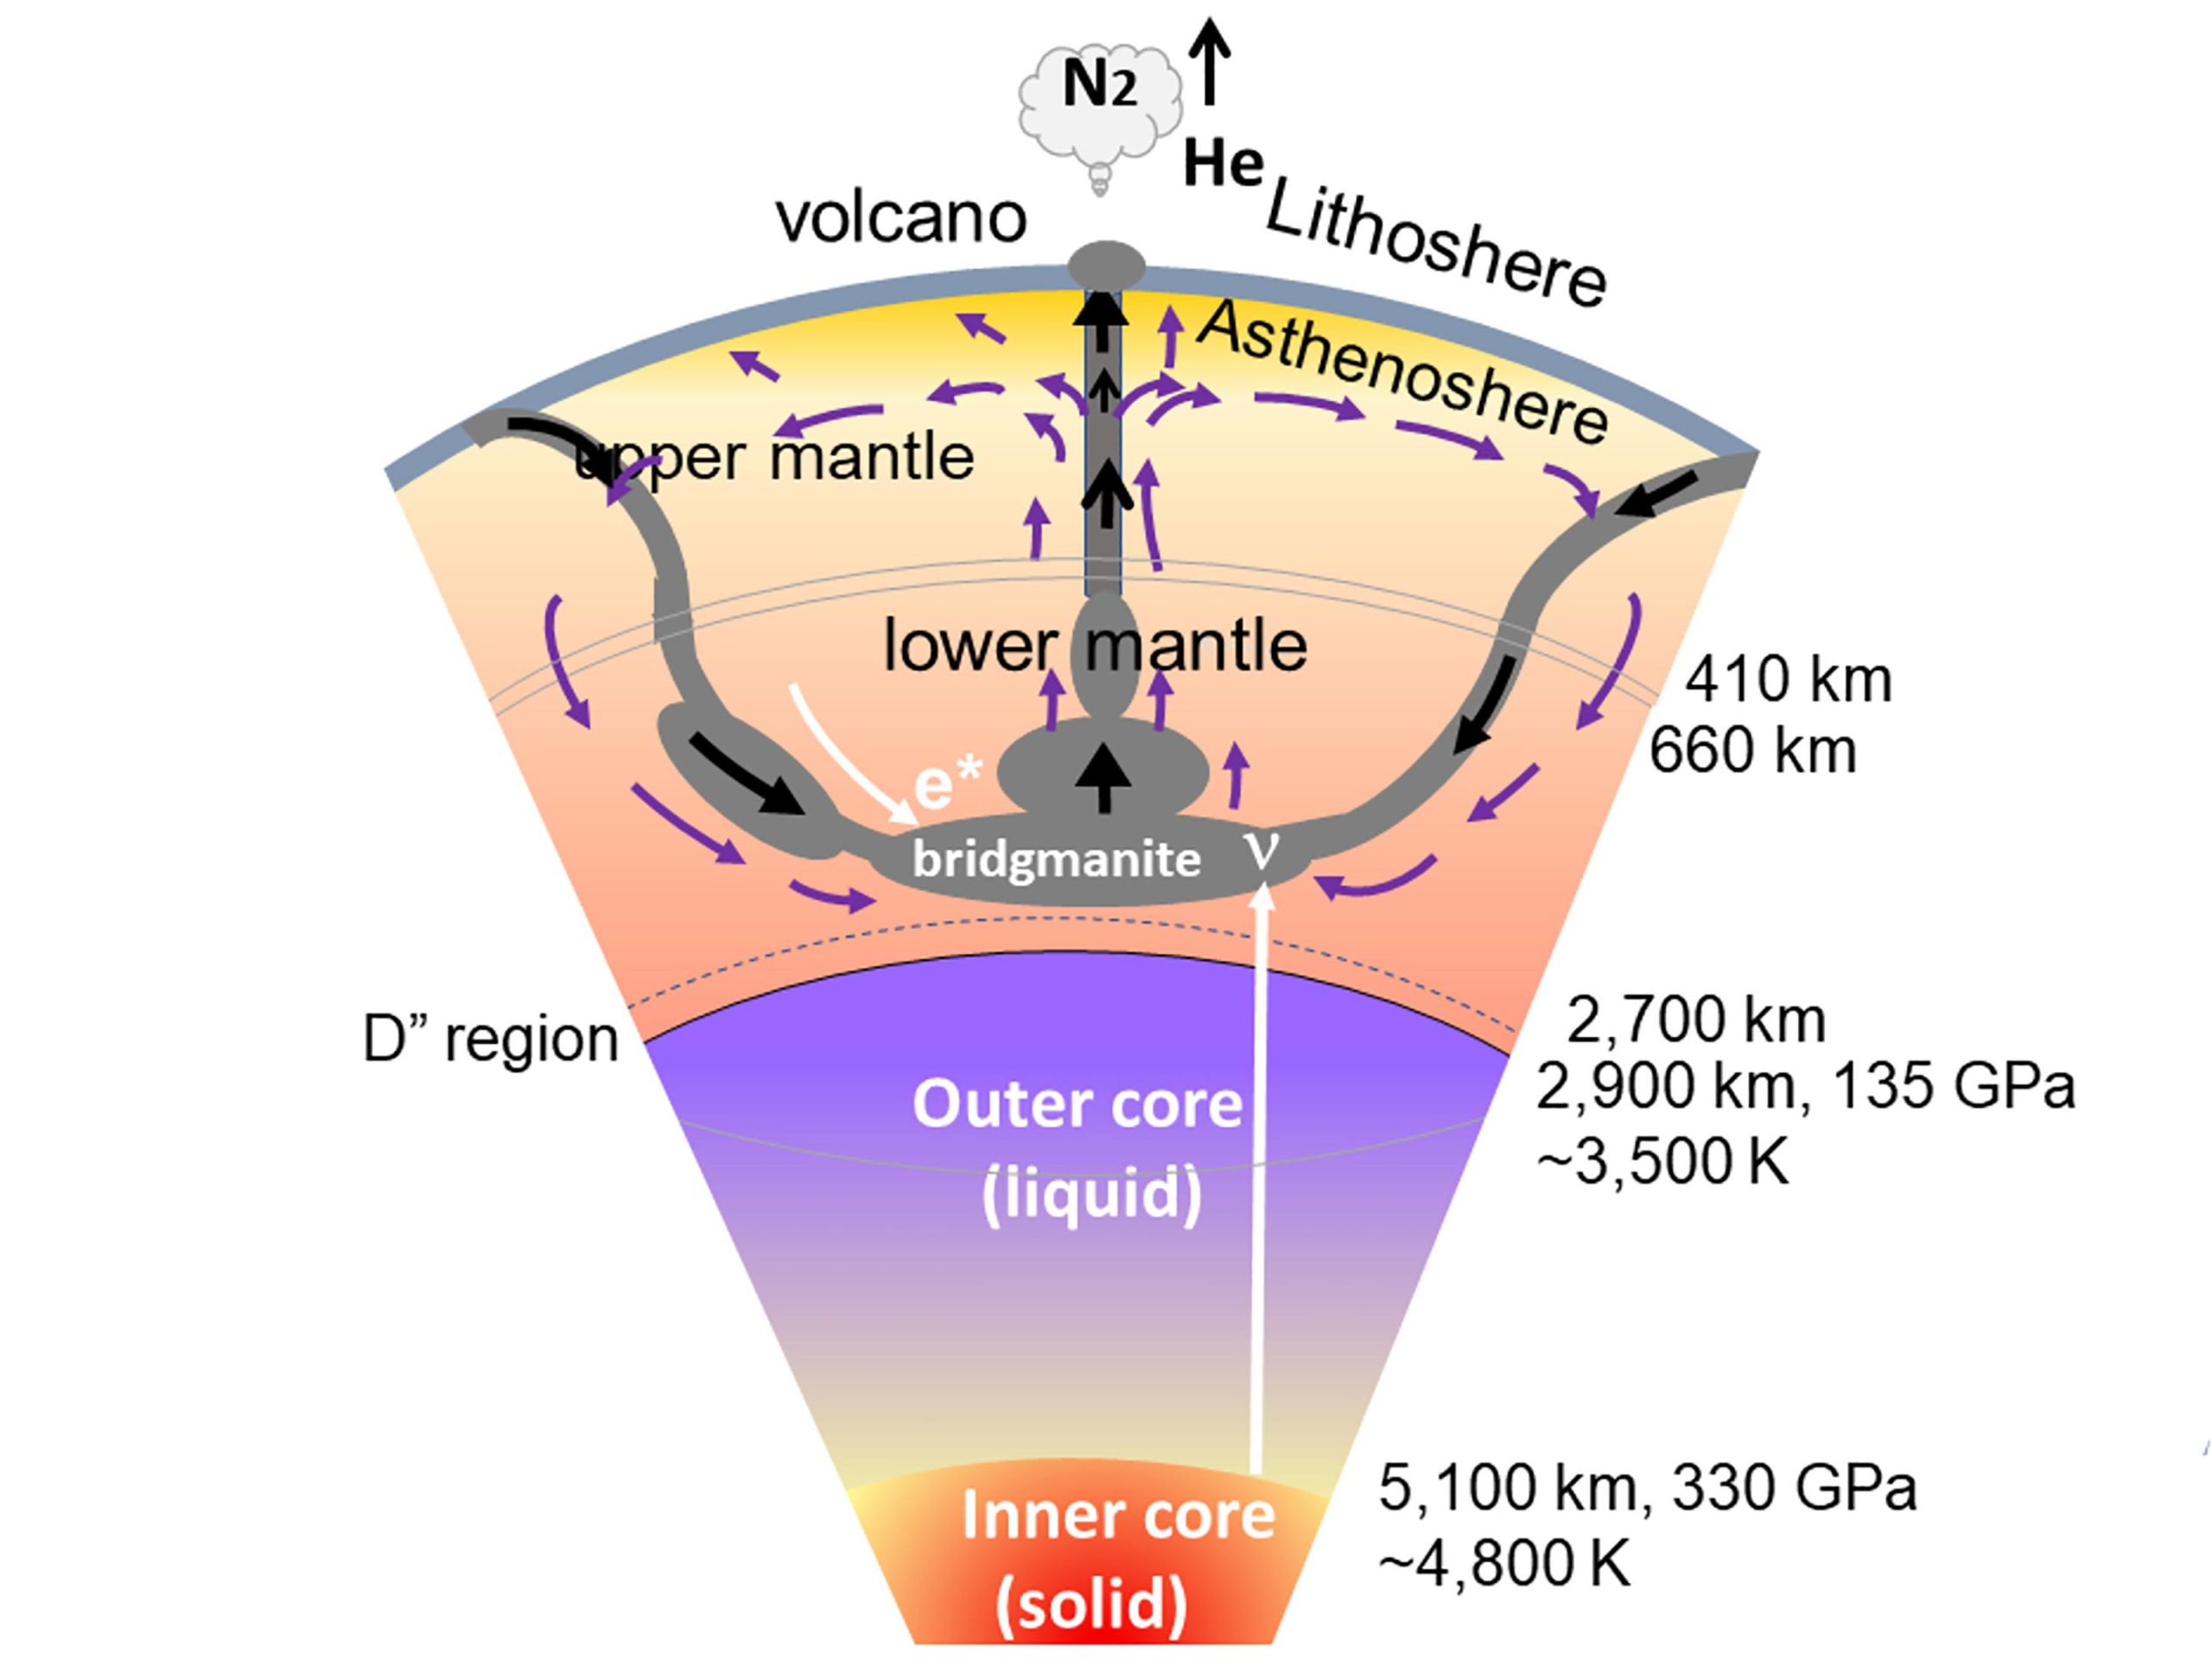 Cross-section of the Earth’s interior: crust, upper- and lower-mantle, and outer- and inner-cores. Credit: Mikio Fukuhara, Alexander Yoshino, an